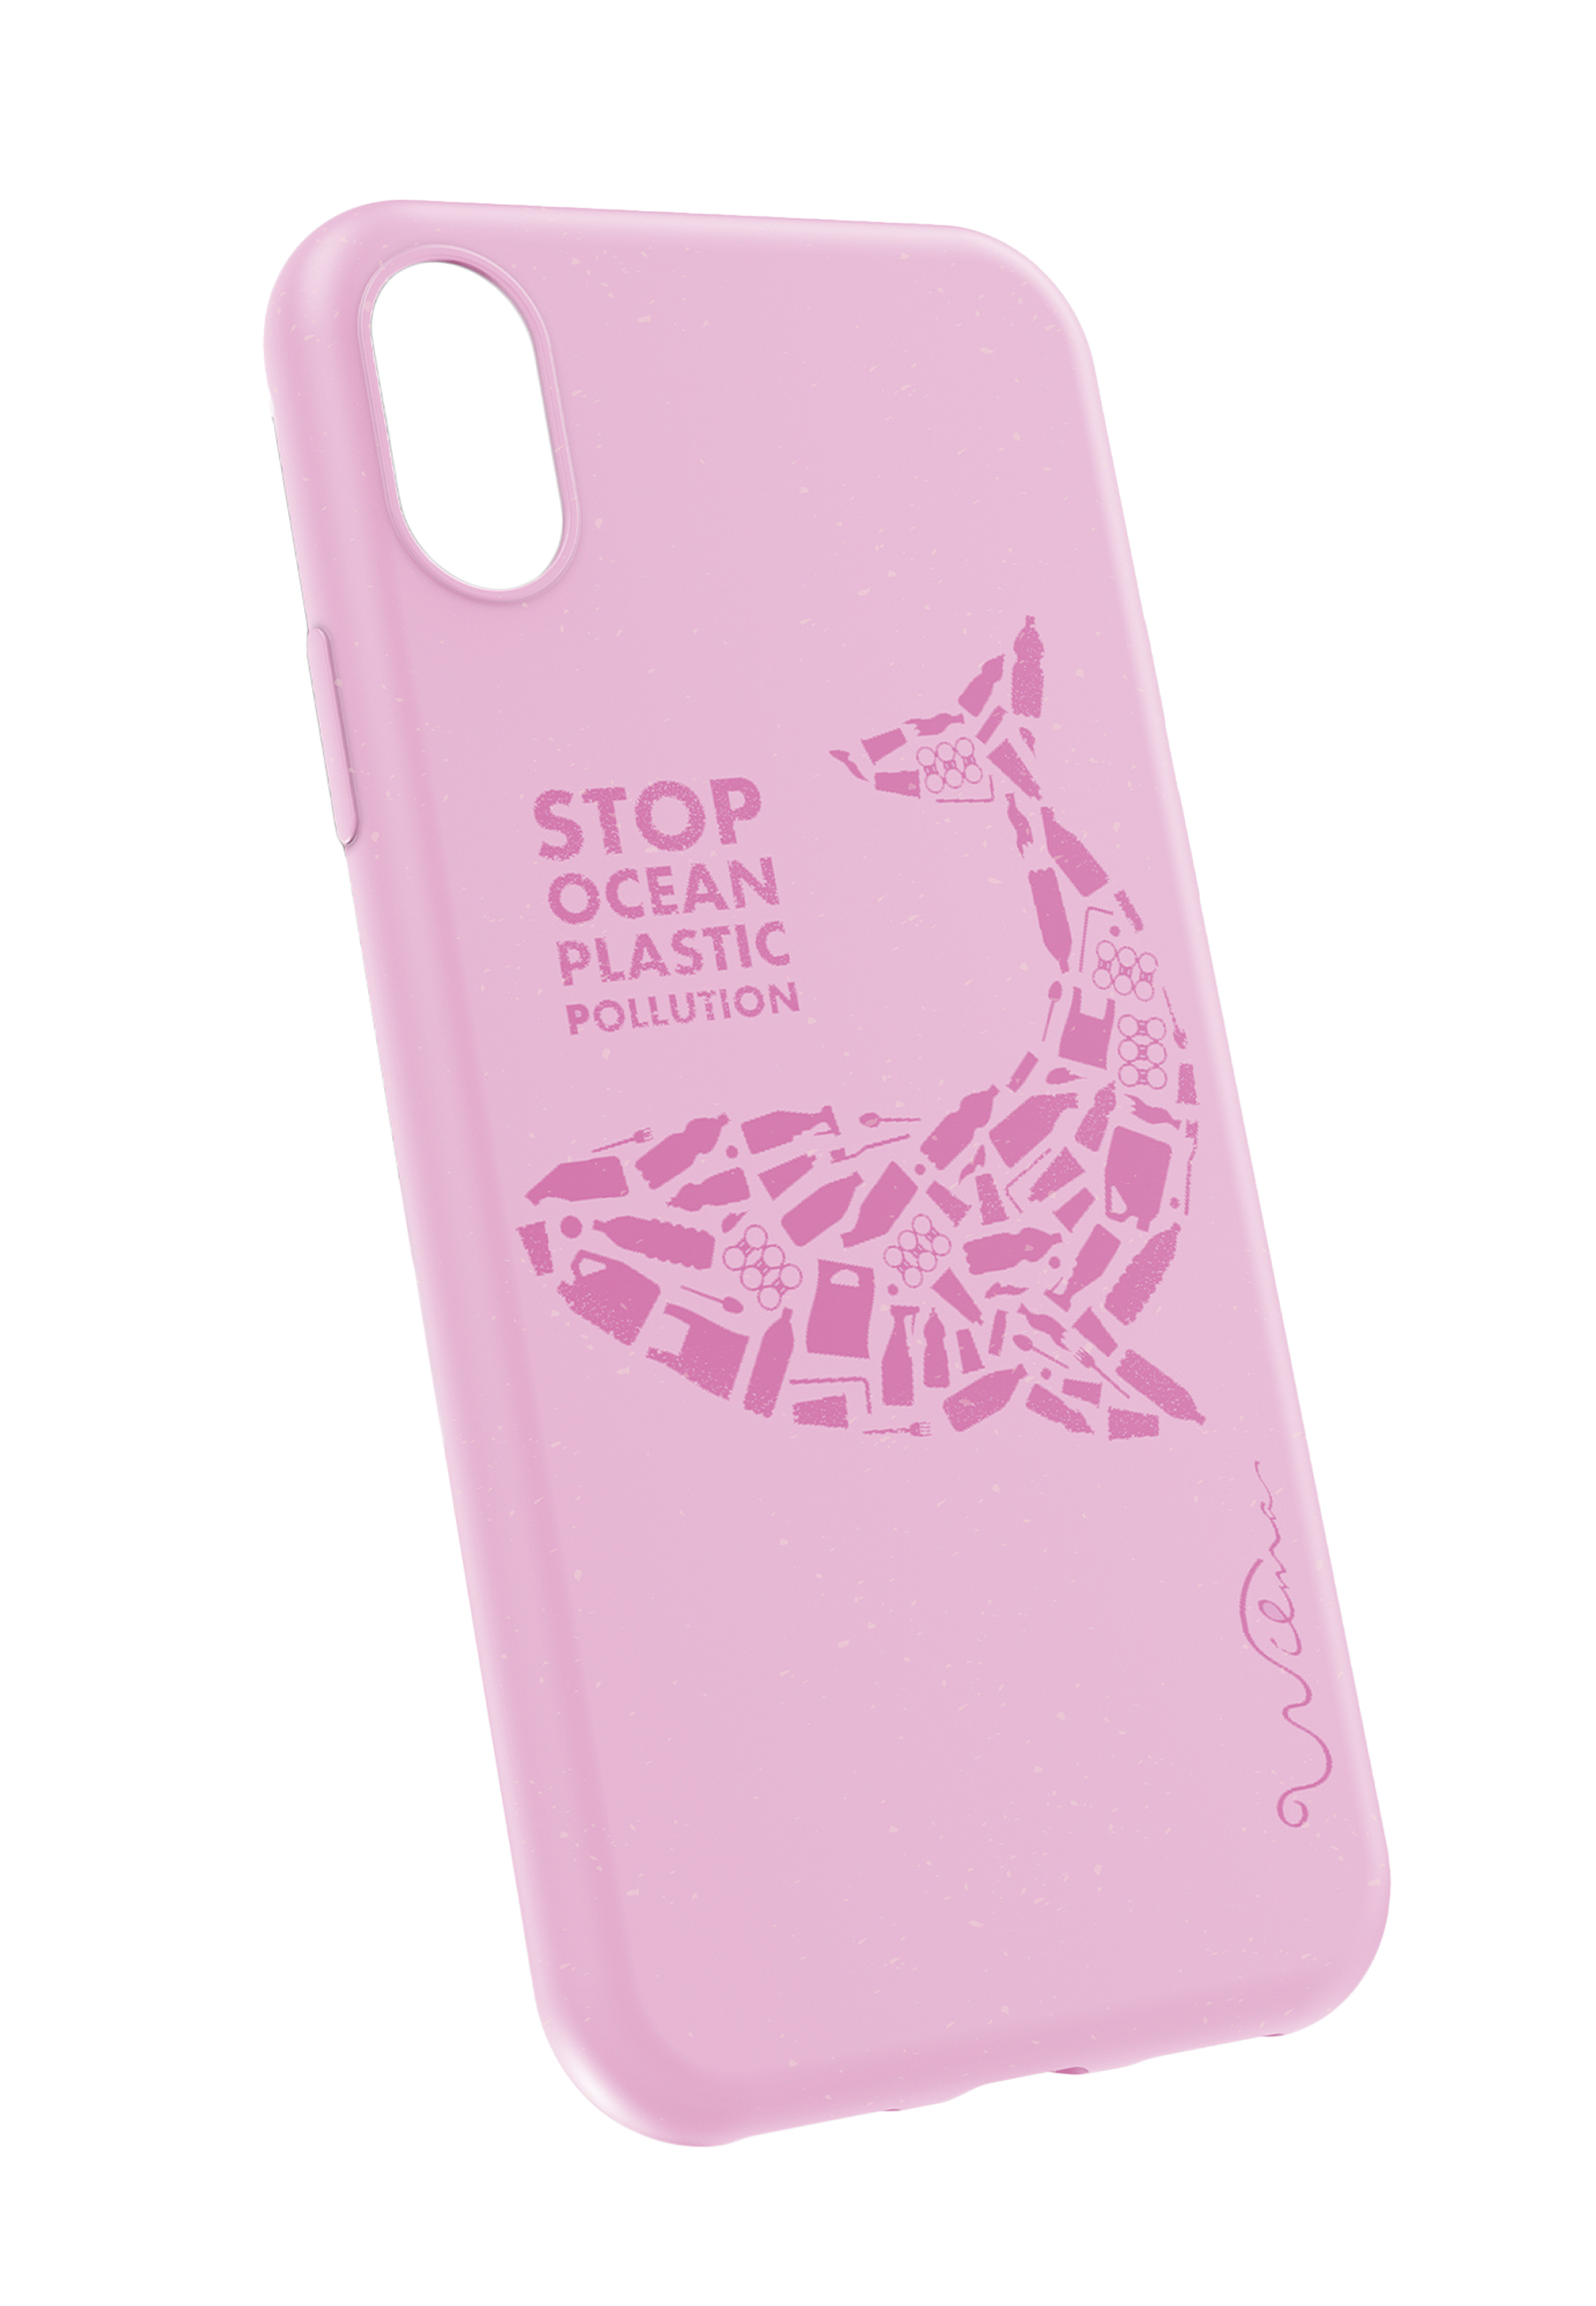 iPhone pink BY RIPXS, Apple, FASHION X/XS, WILMA Backcover, ECO